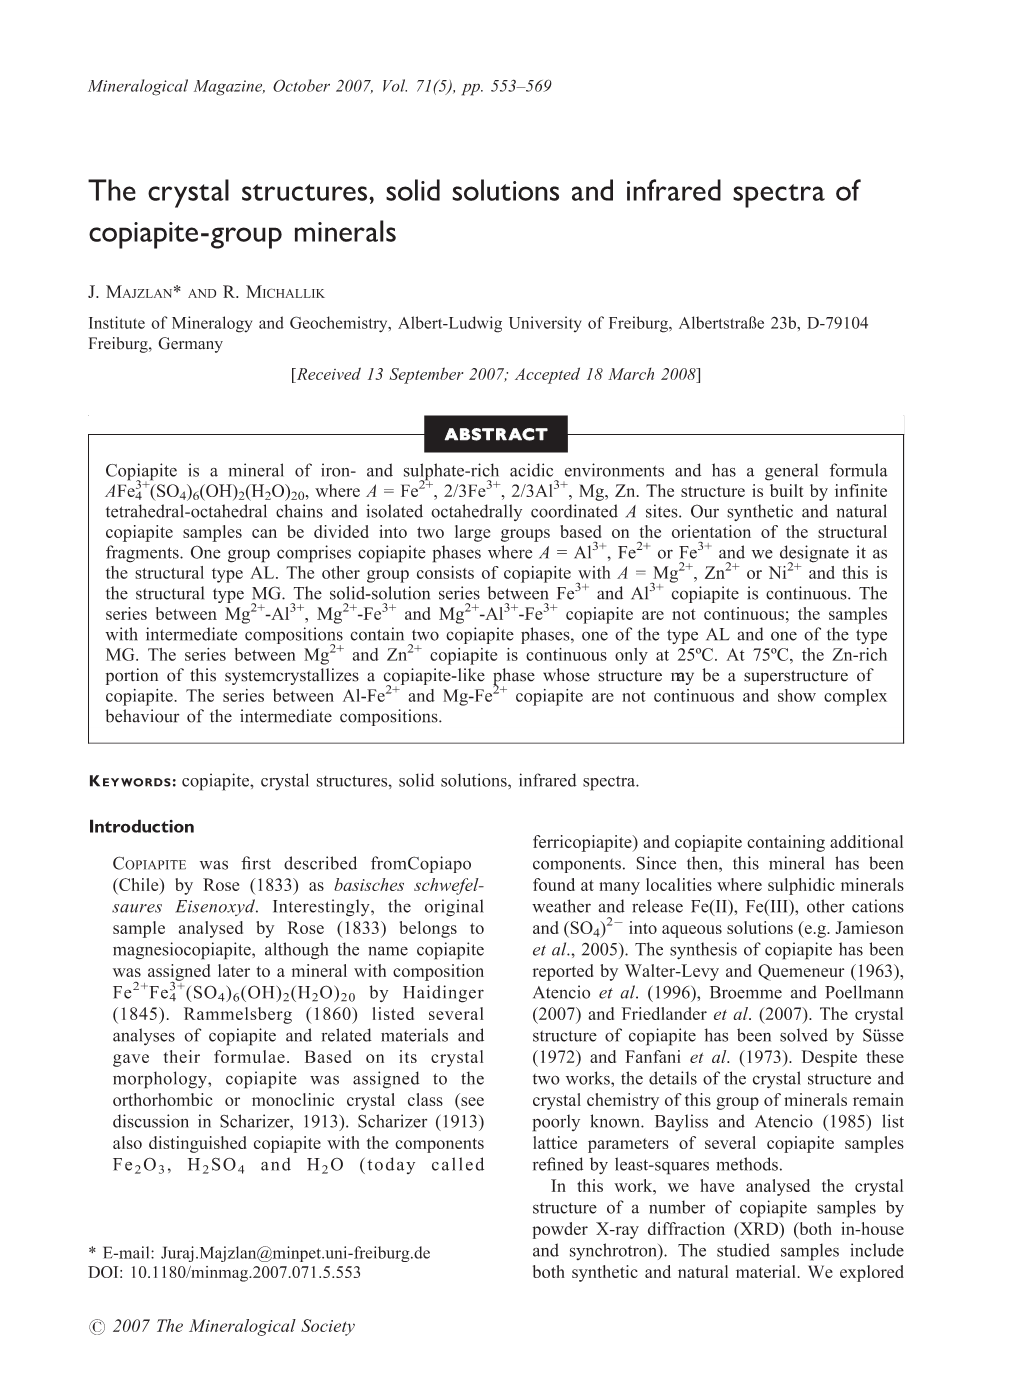 The Crystal Structures, Solid Solutions and Infrared Spectra of Copiapite-Group Minerals